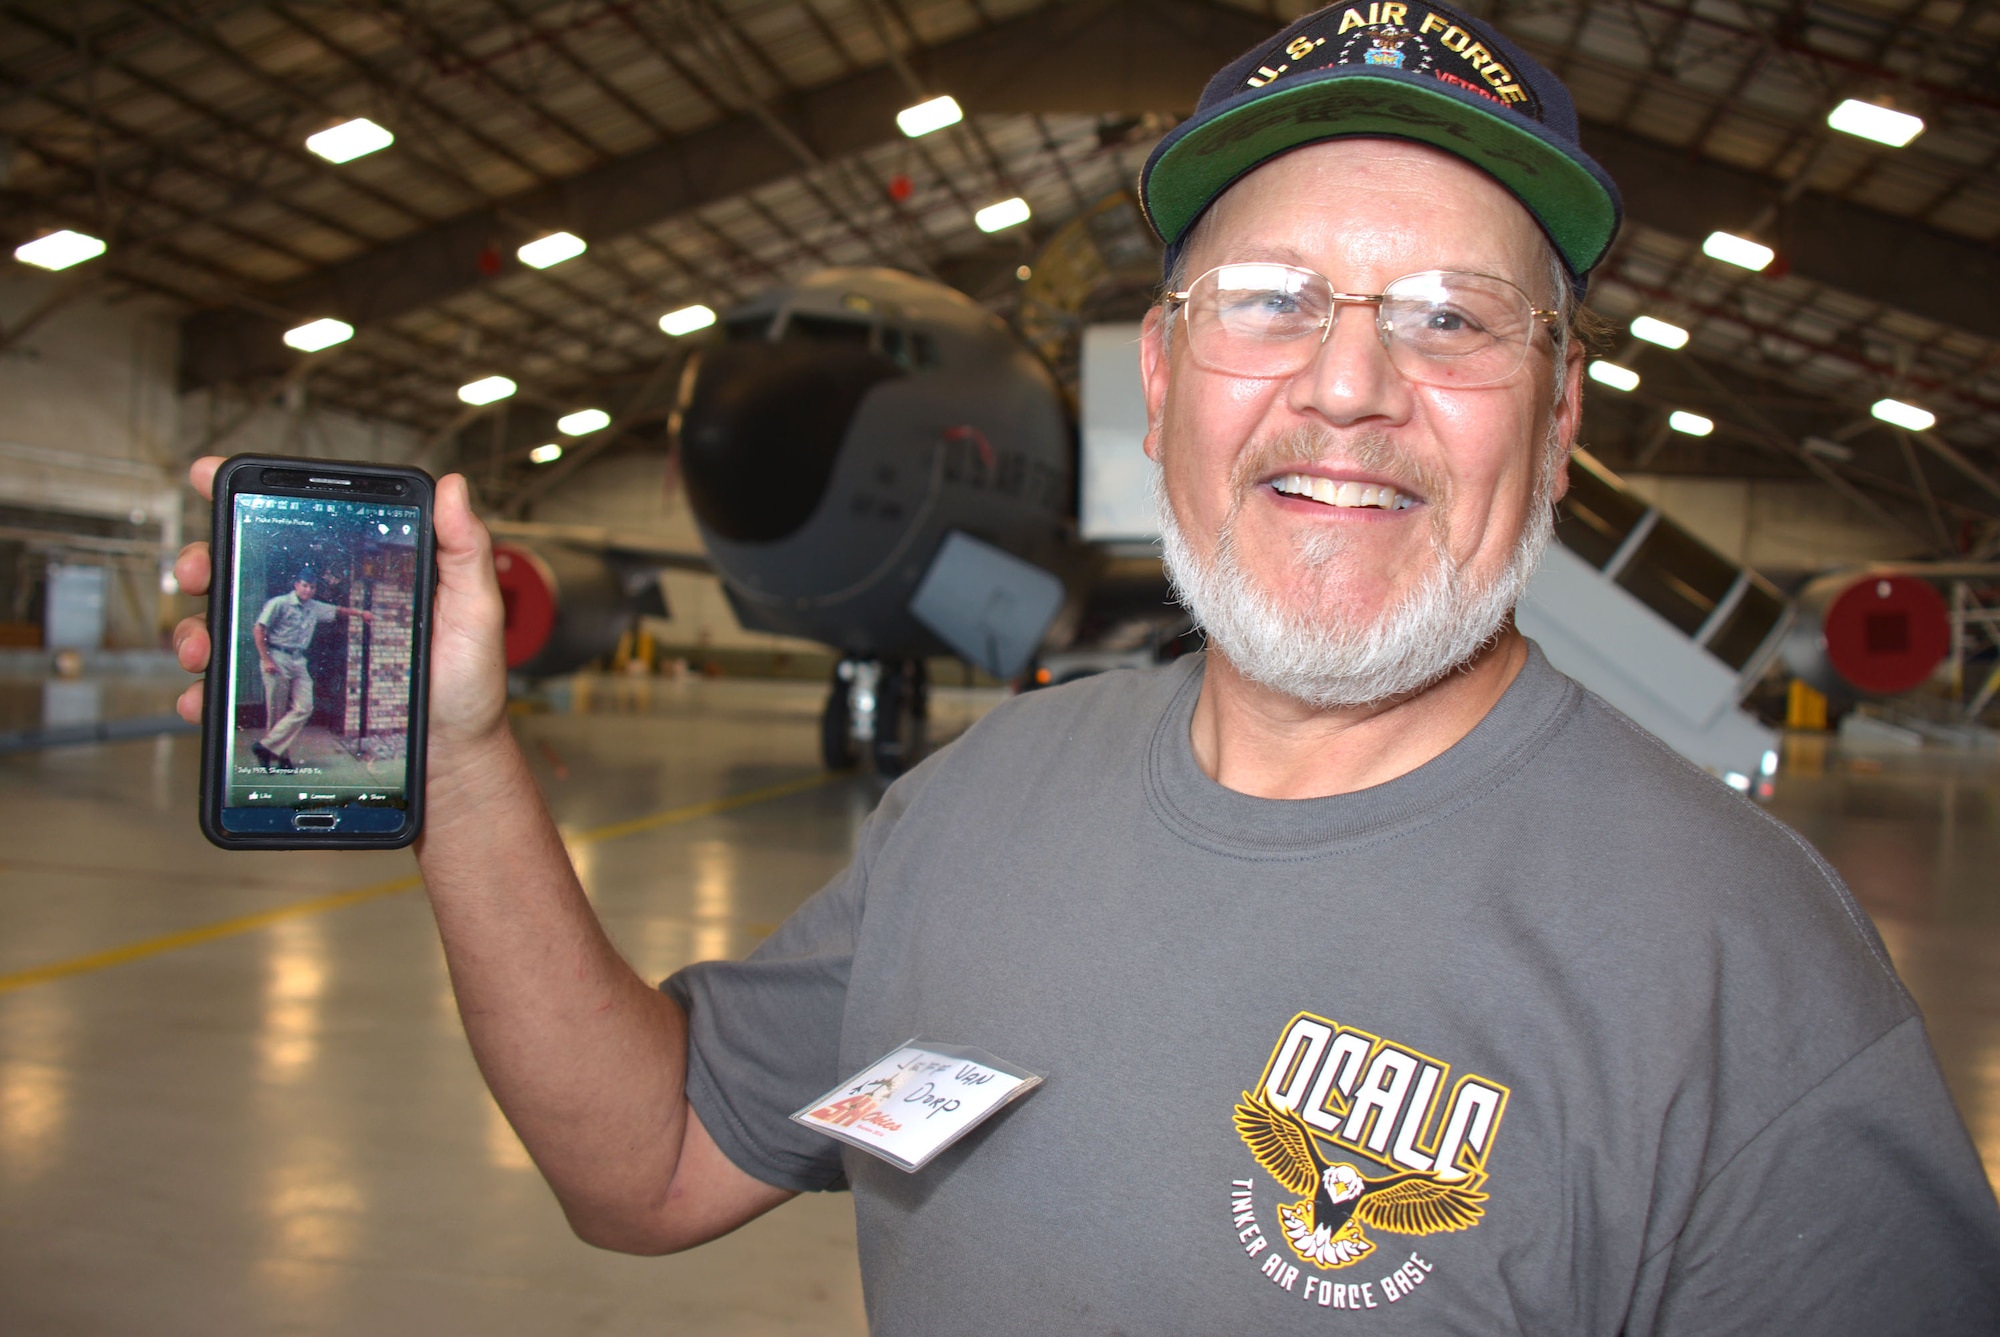 Jeff Van Dorp showcases a photo of himself, Airman Van Dorp from 1975 at the “SH Okie” reunion Sept. 23 in the 507th Air Refueling Wing Hangar 1030. Van Dorp served in the Aerial Repair and Isochronal Inspection shop in the wing from 1981-2008 and currently works in maintenance in the Air Logistics Center as a civil service civilian. (U.S. Air Force Photo/Maj. Jon Quinlan)       